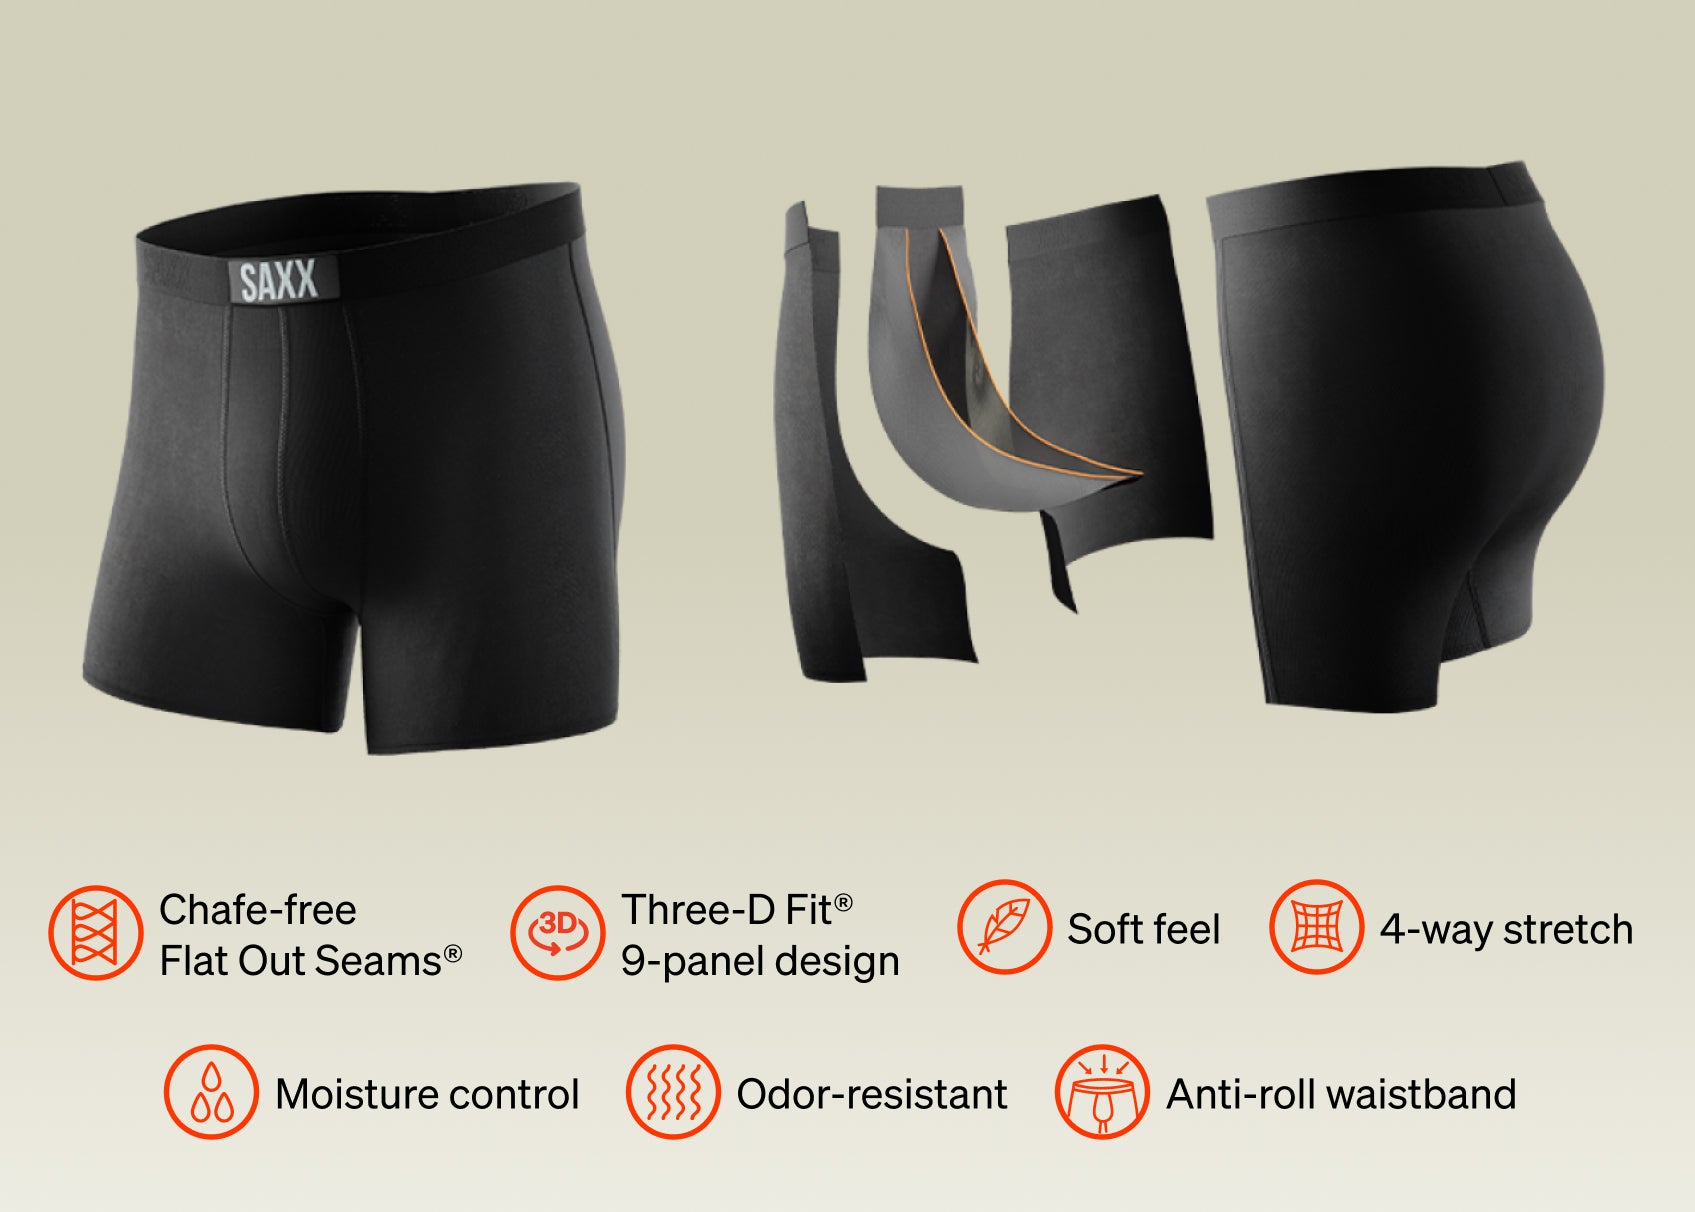 An image of a pair of black boxer briefs on the left. To the right the boxer briefs are opened out to show their construction.